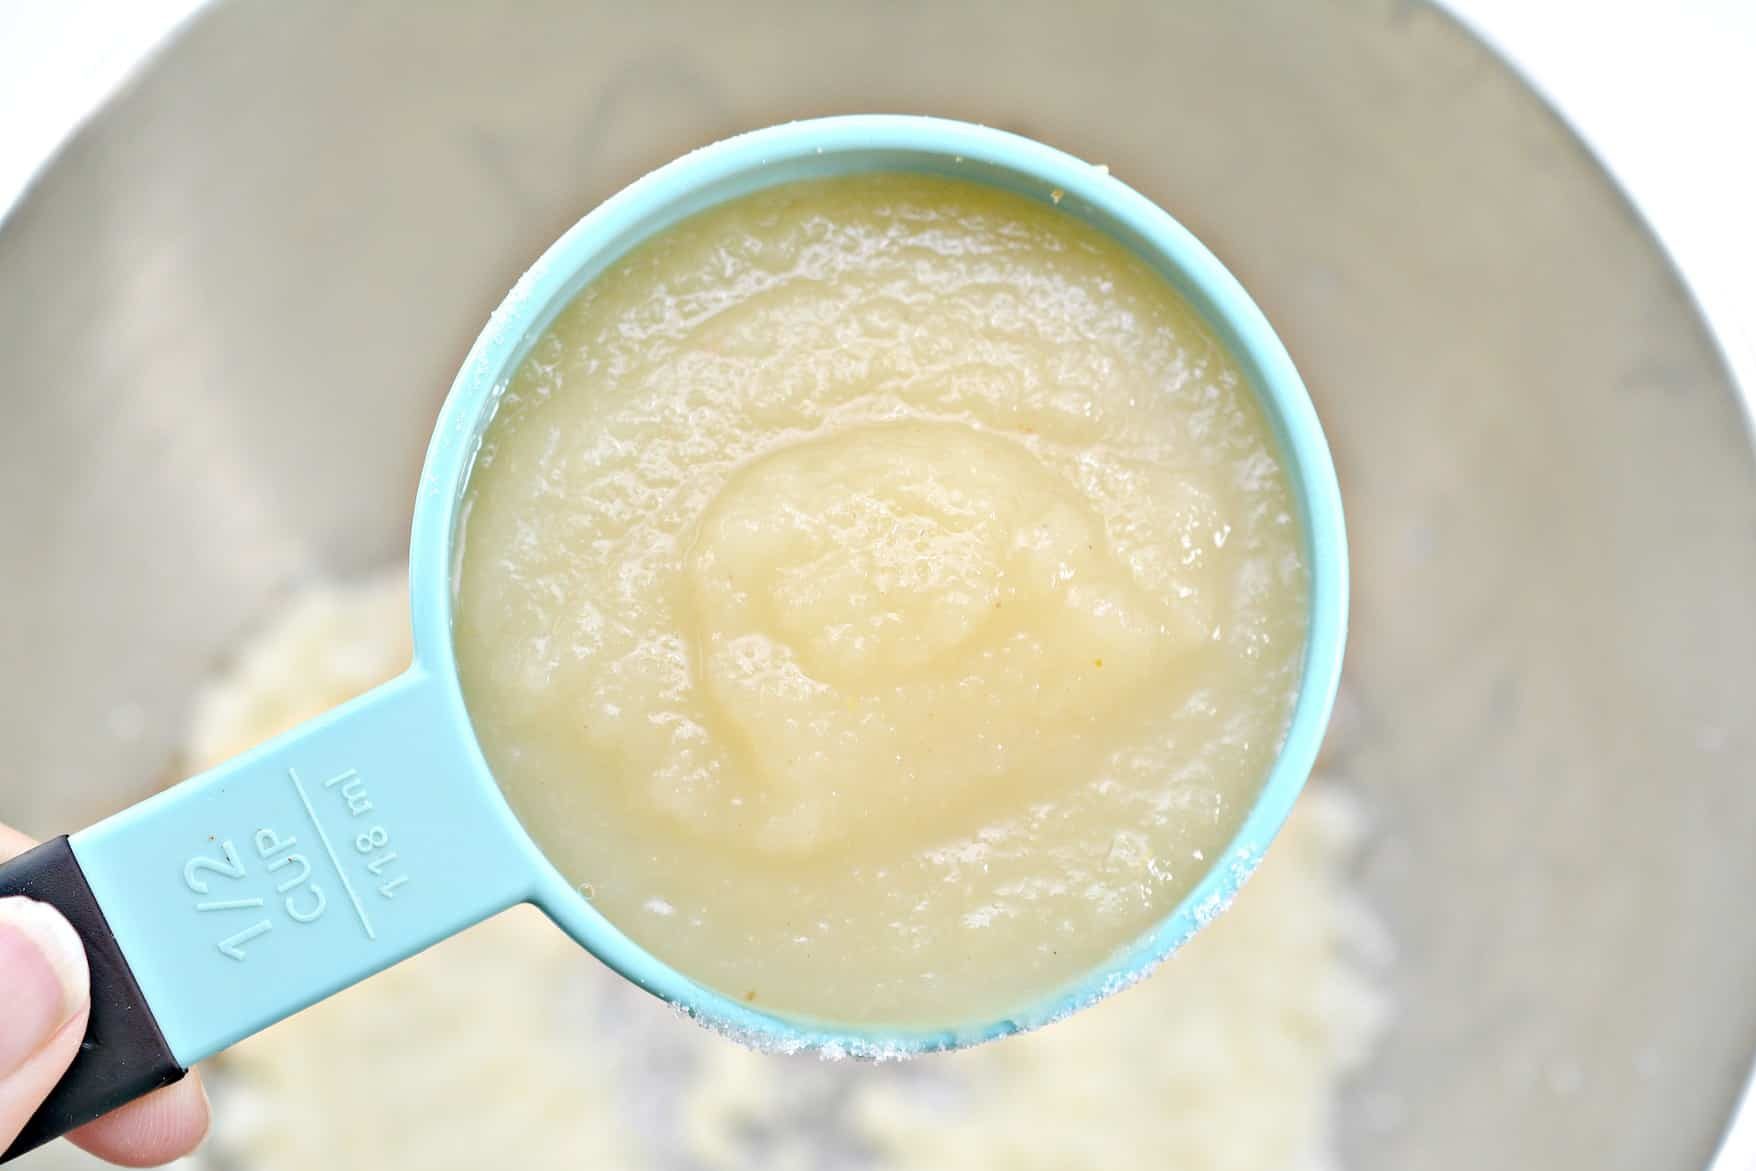 Add ½ cup of applesauce and 2 tsp vanilla to the mixing bowl.